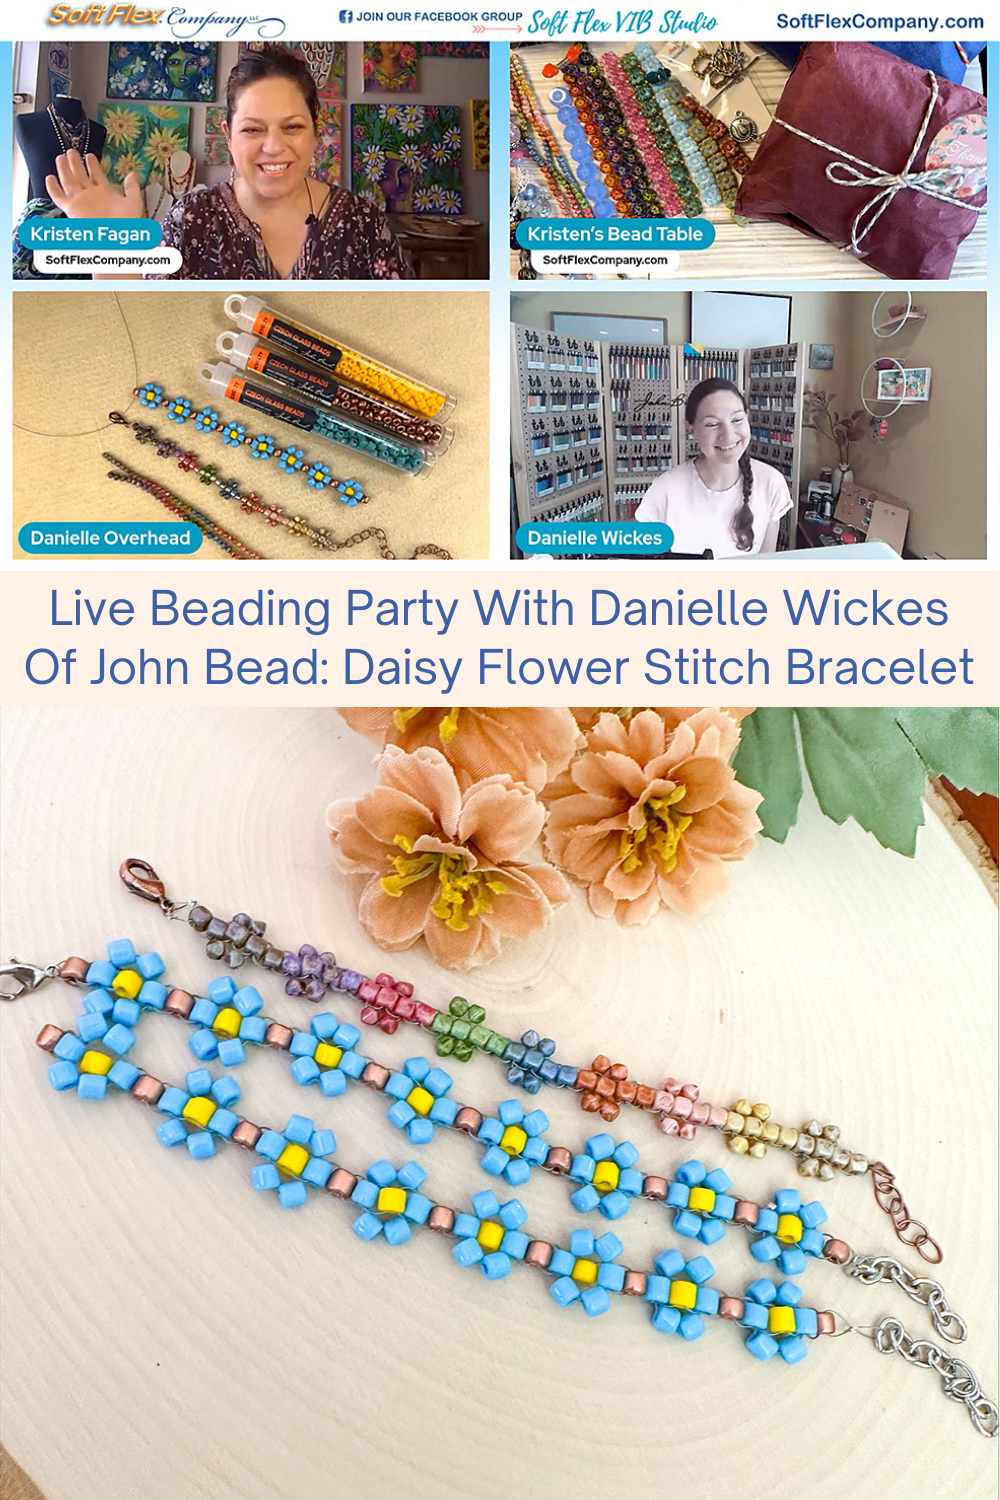 Live Beading Party With Danielle Wickes Of John Bead Daisy Flower Stitch Bracelet Collage